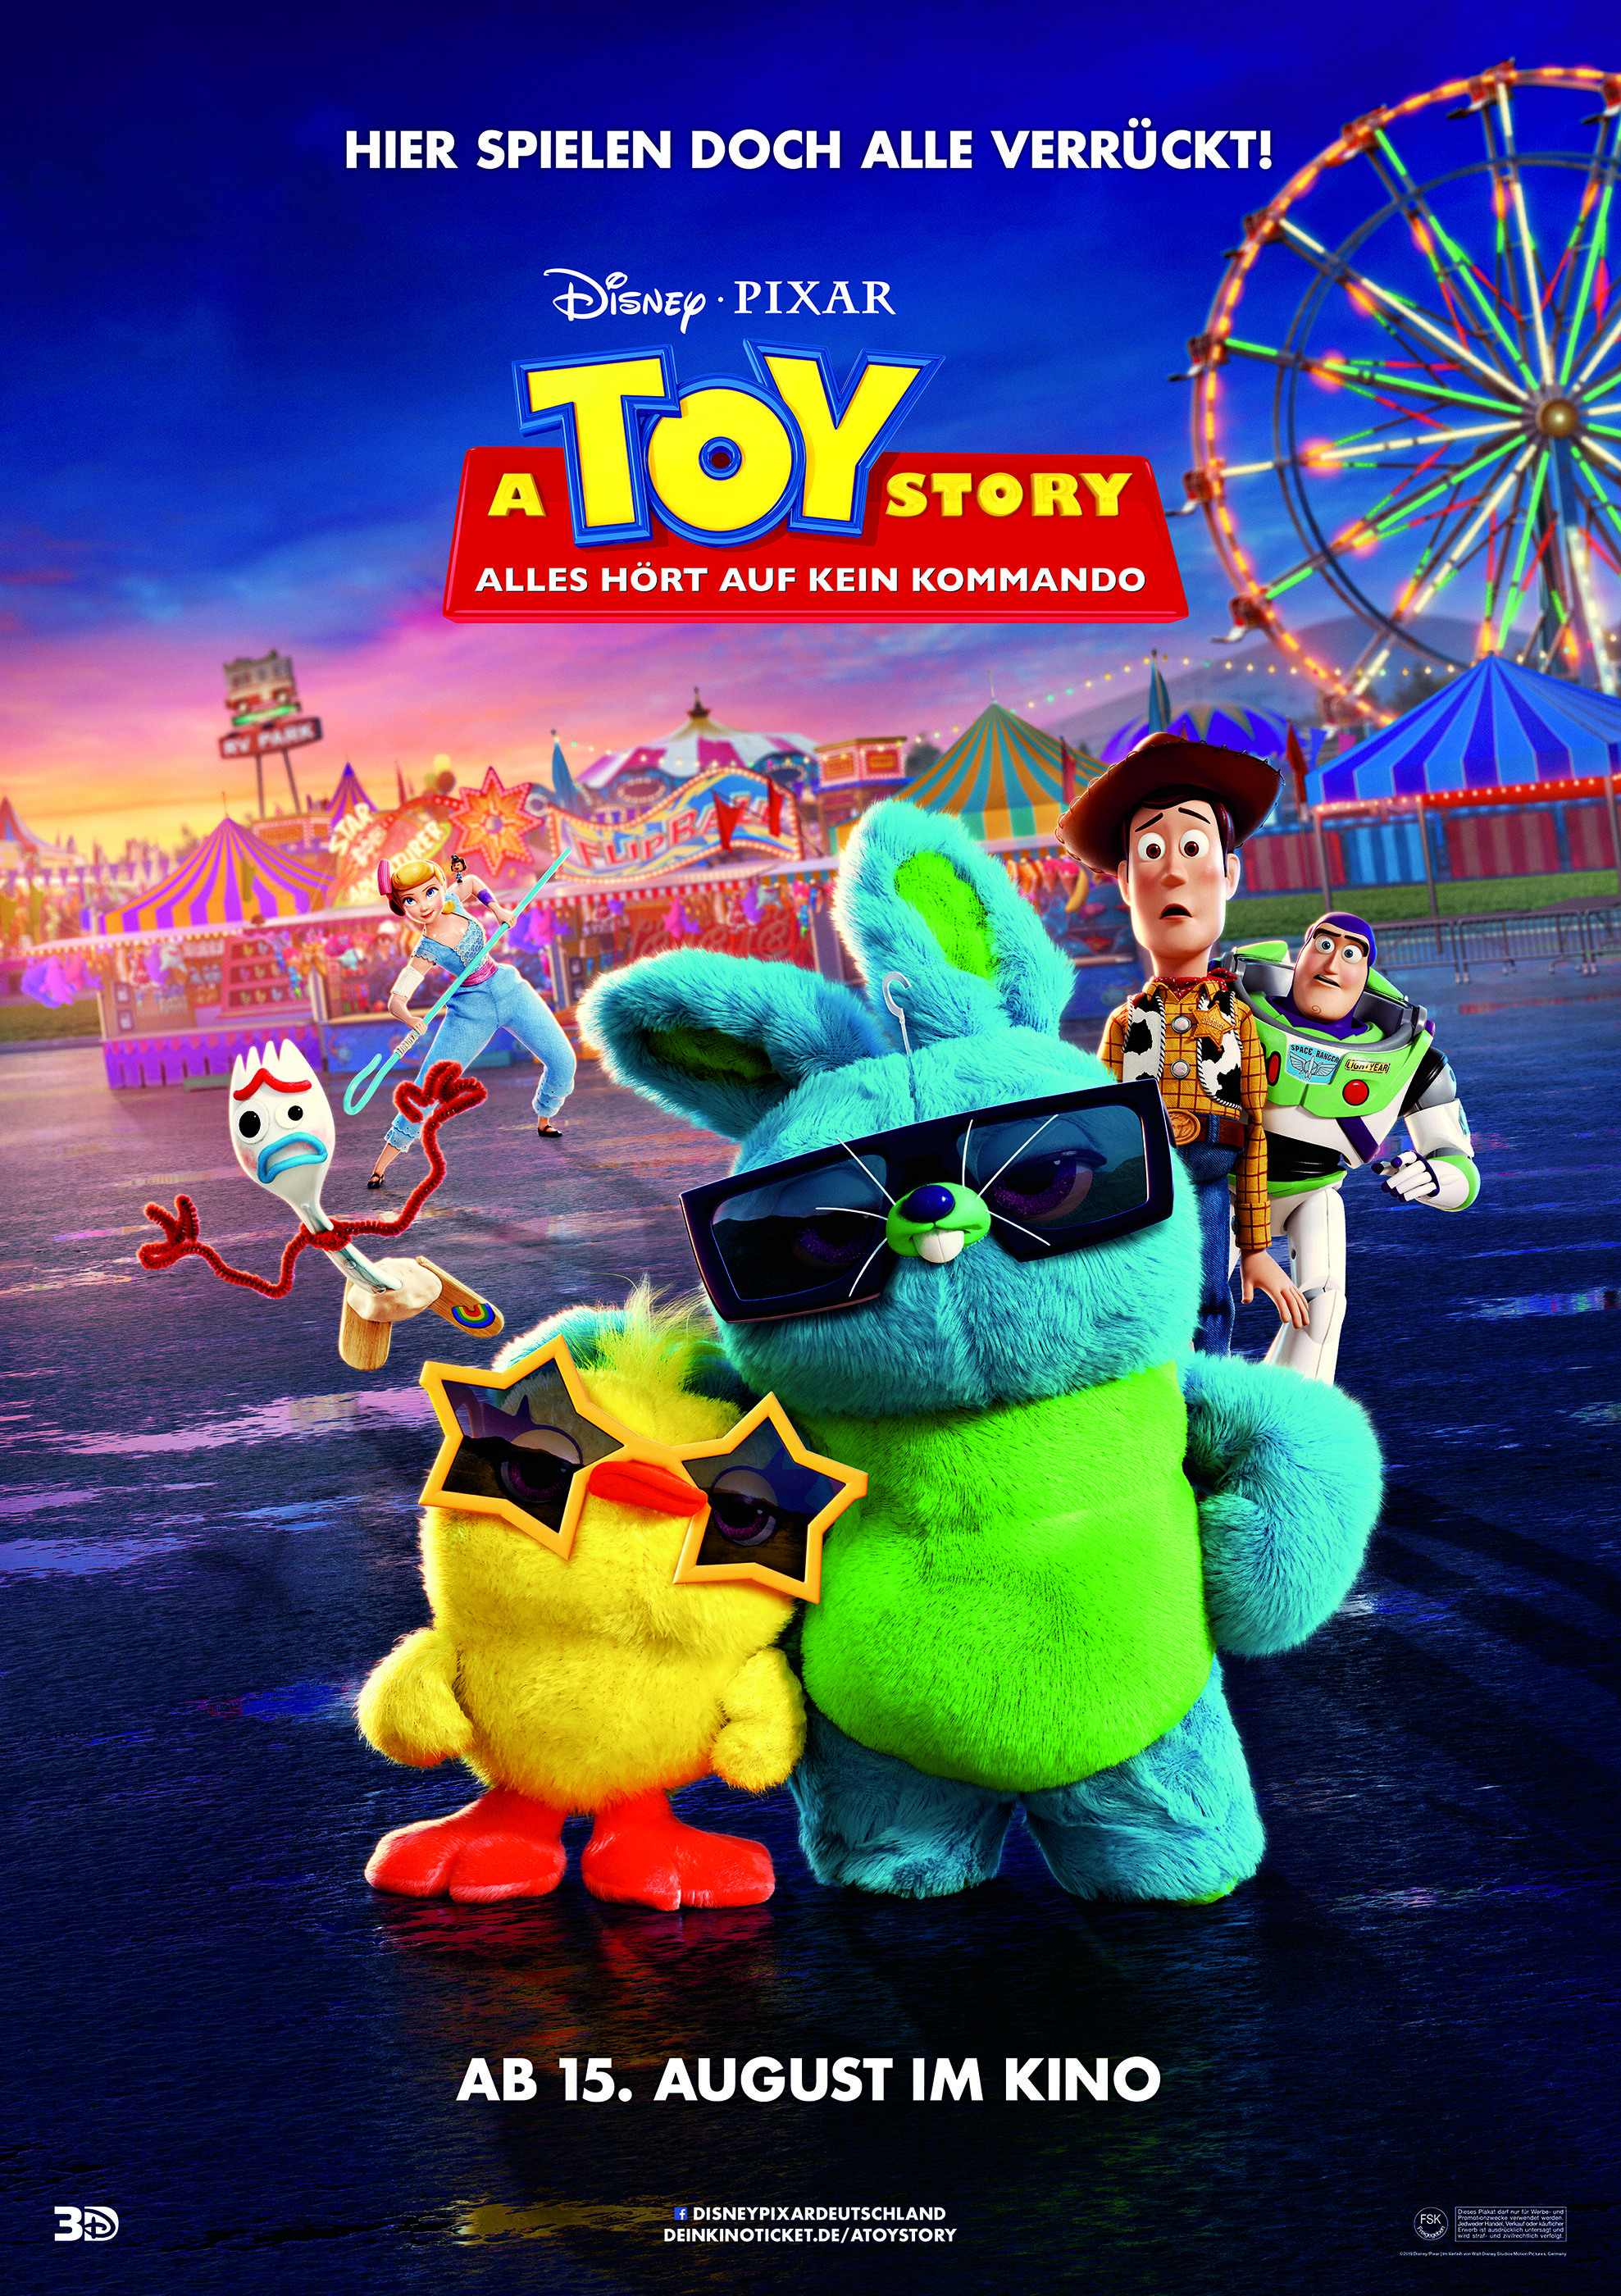 A Toy Story 4 3D Atmos